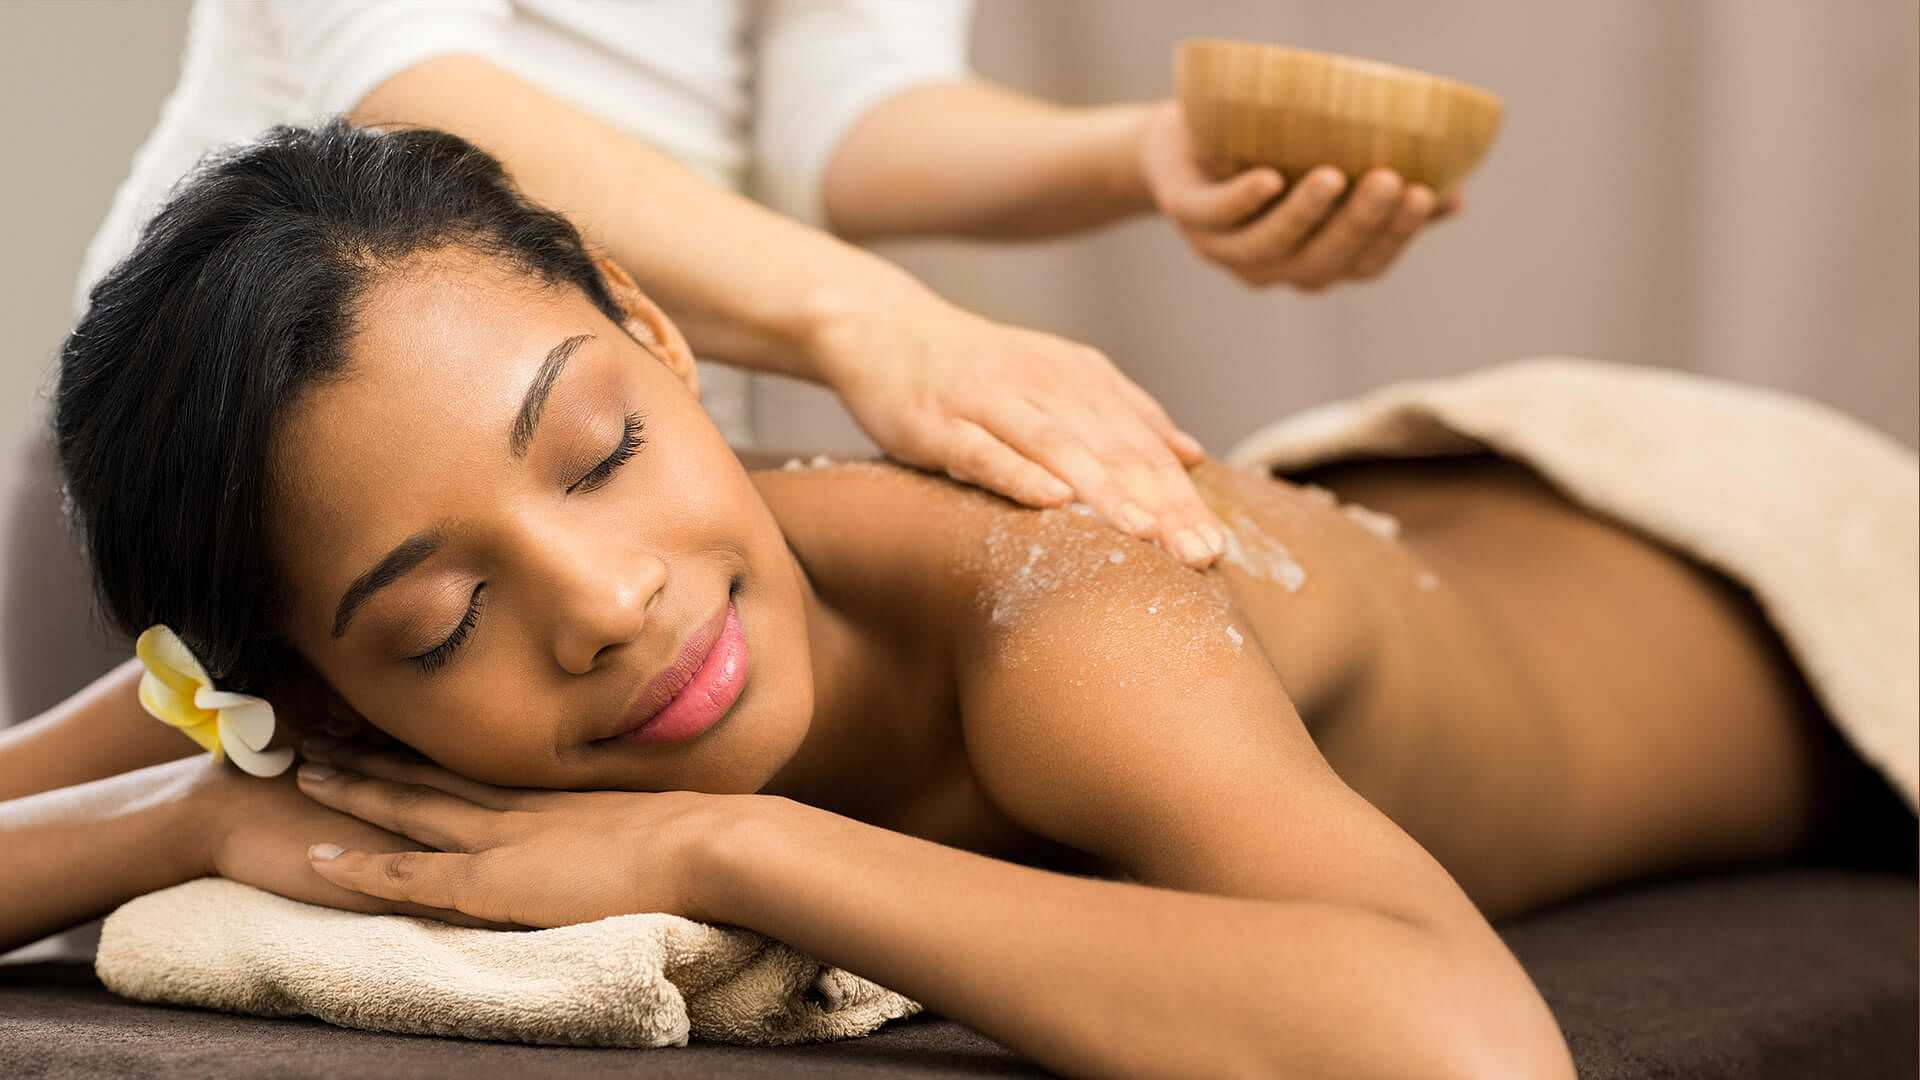 Woman receiving a relaxing back massage in a spa setting, eyes closed, with a towel draped over her.